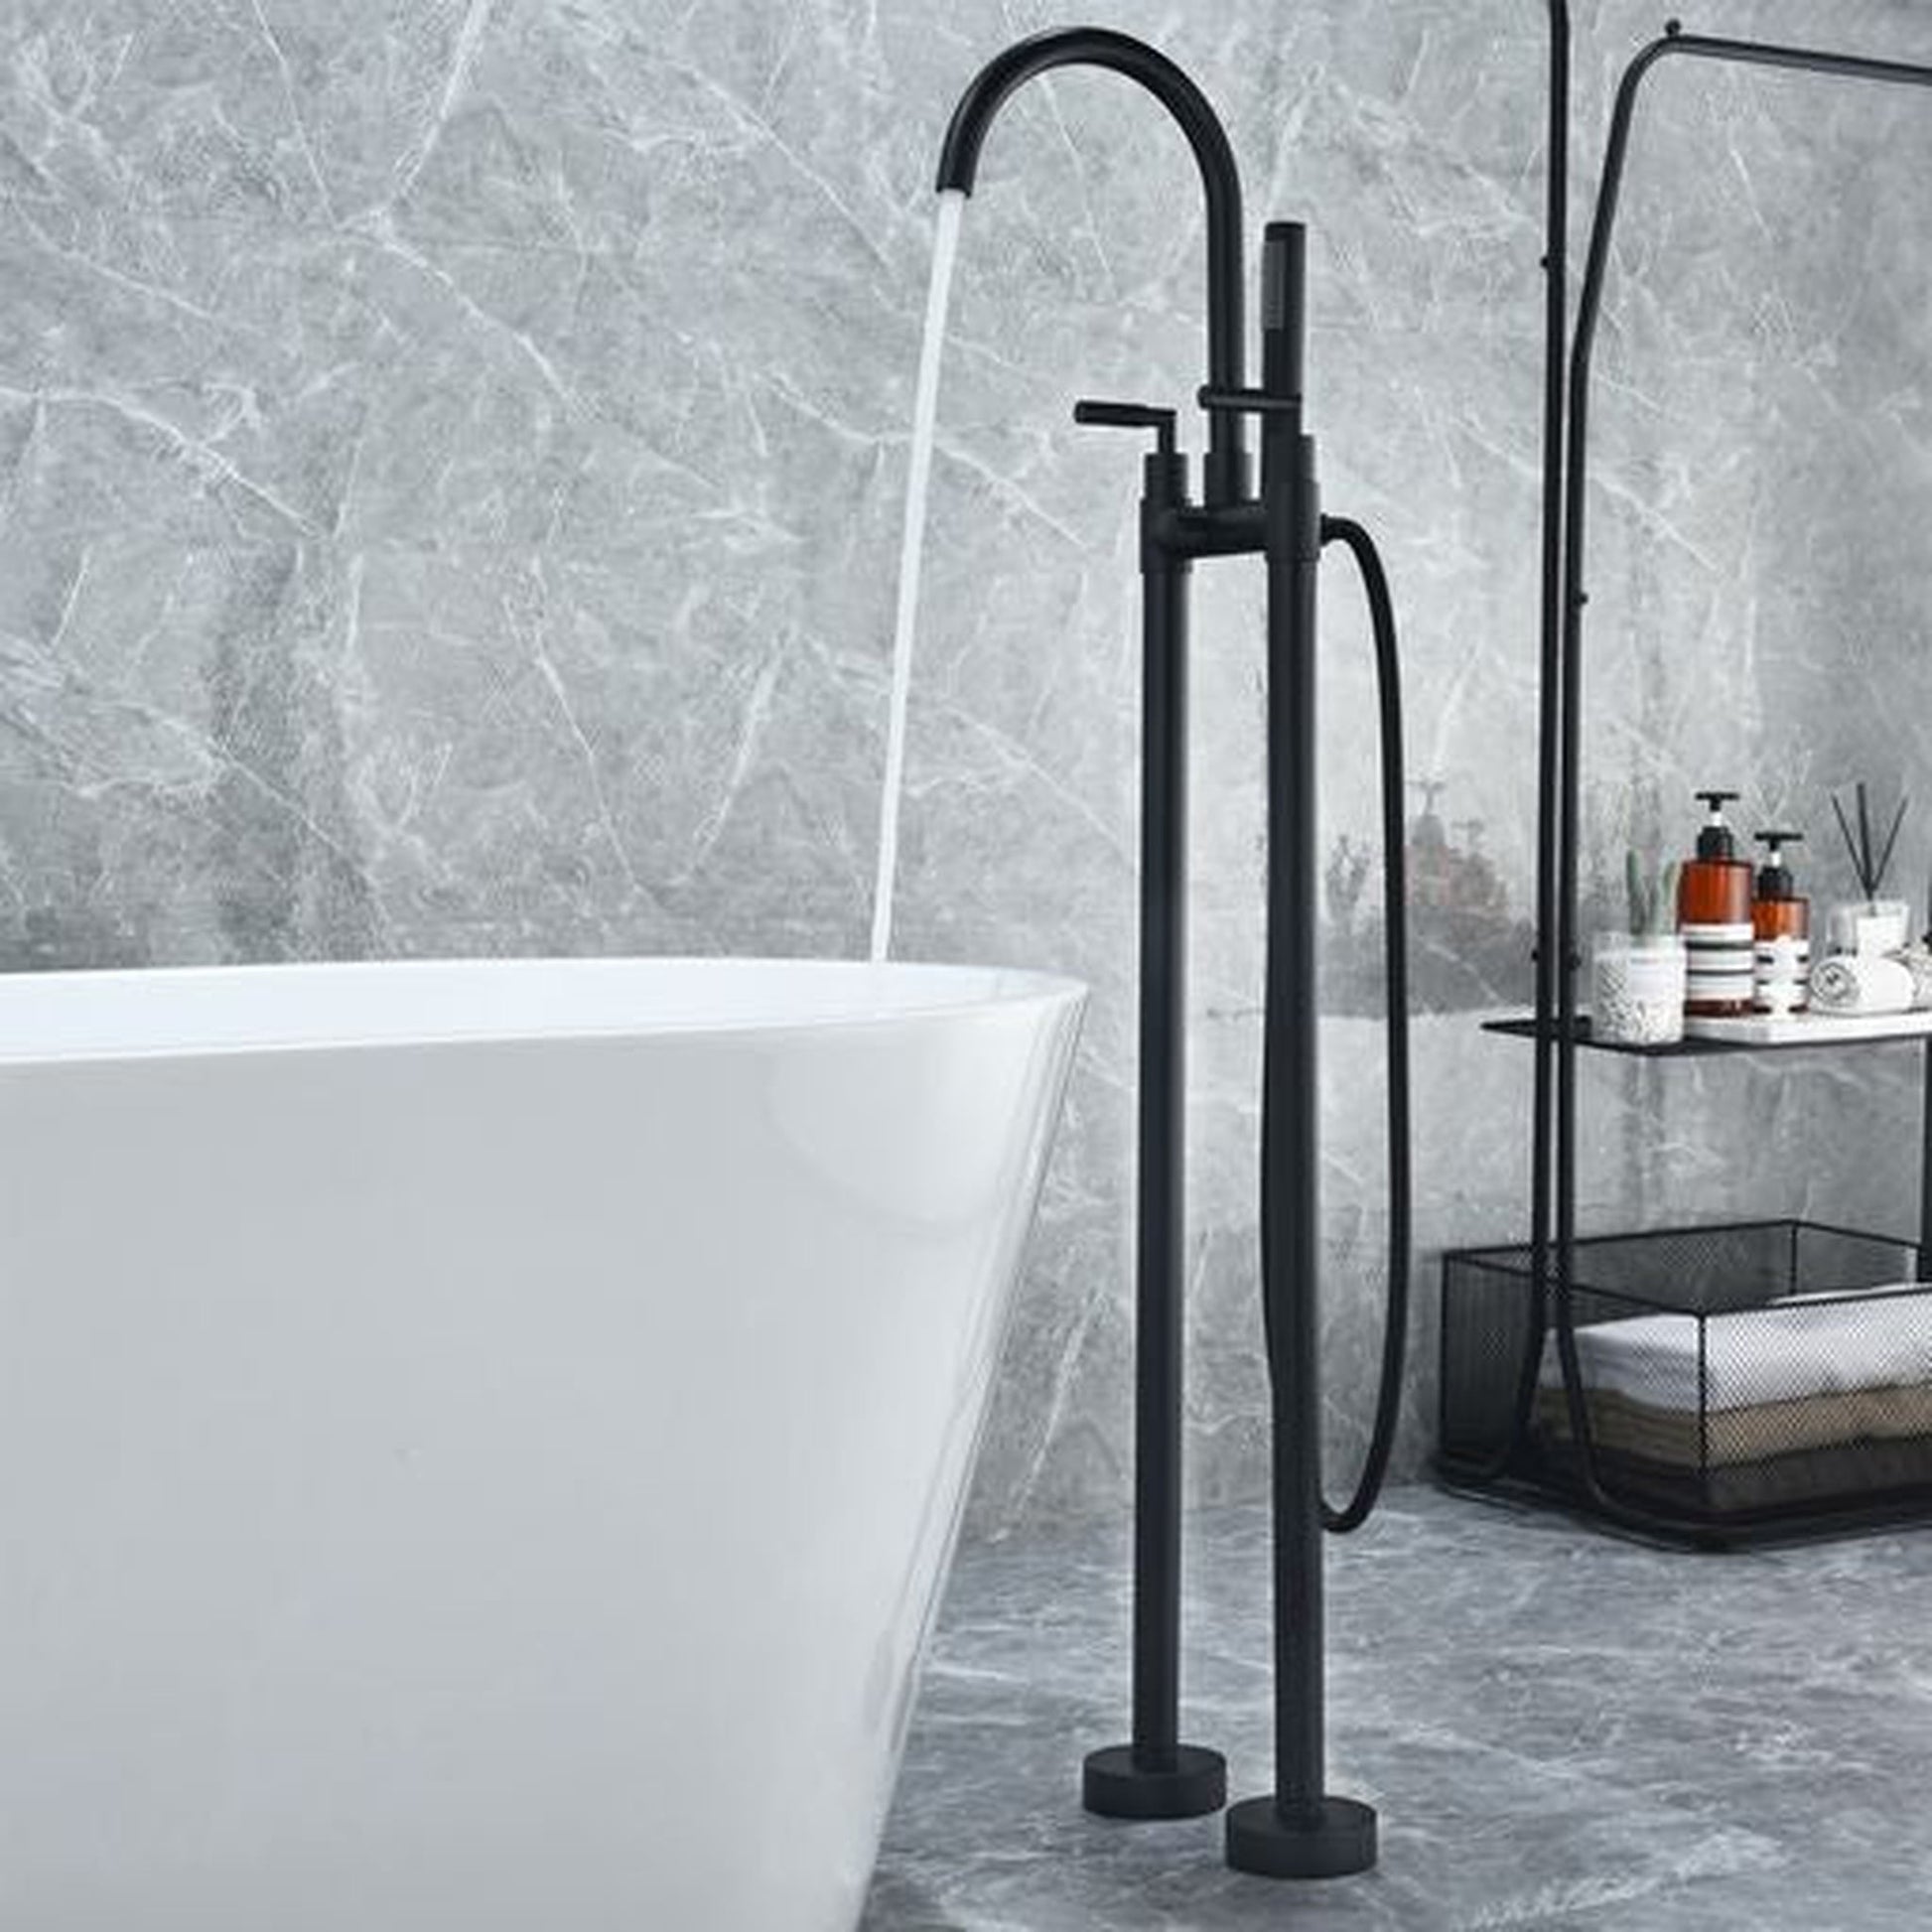 Altair Gnosall Matte Black Double Lever Handle Freestanding Bathtub Faucet With Handshower